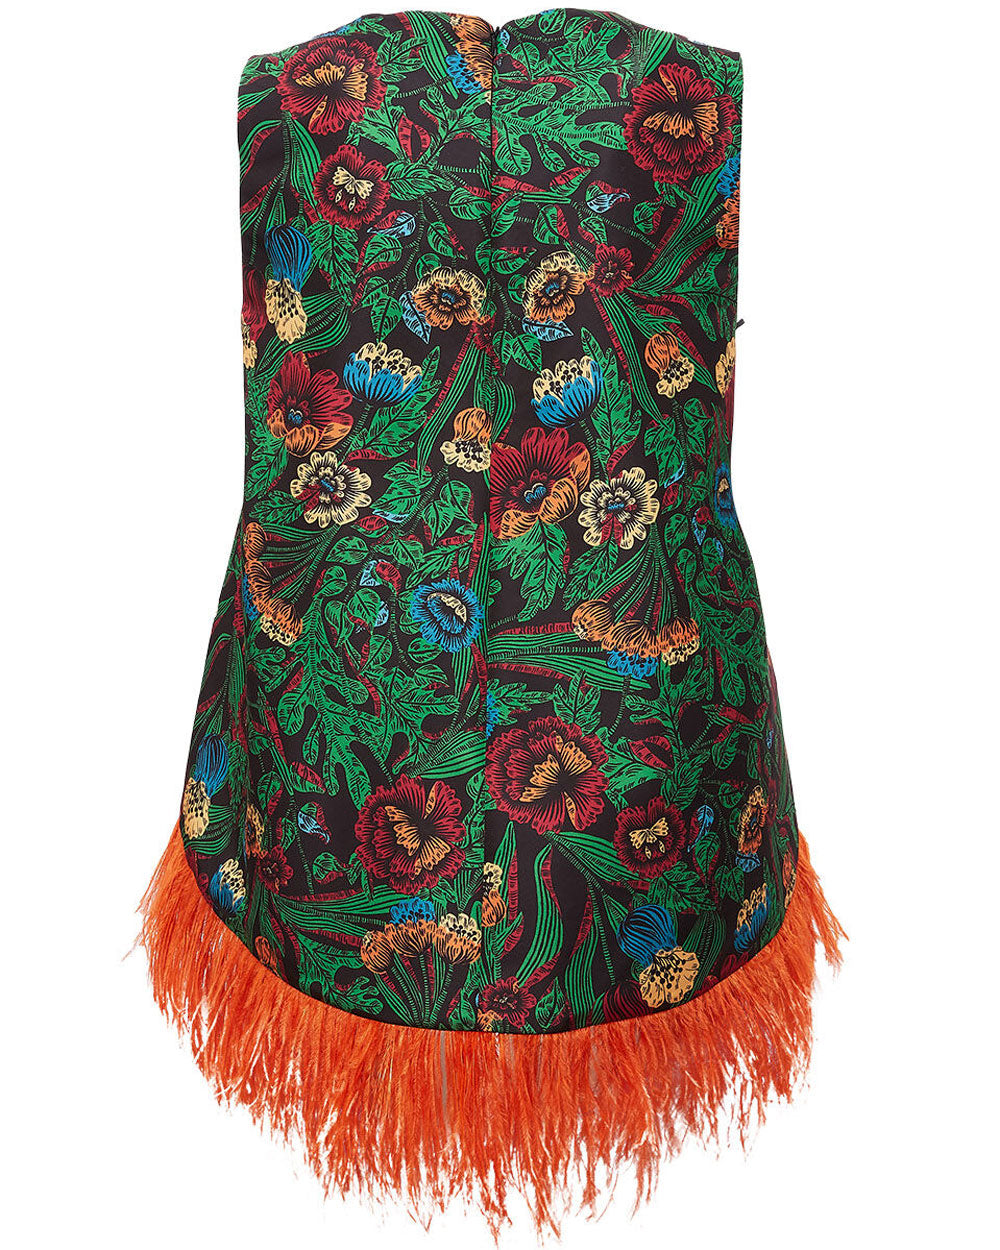 Night Garden La Scala Top with Feathers in Faille